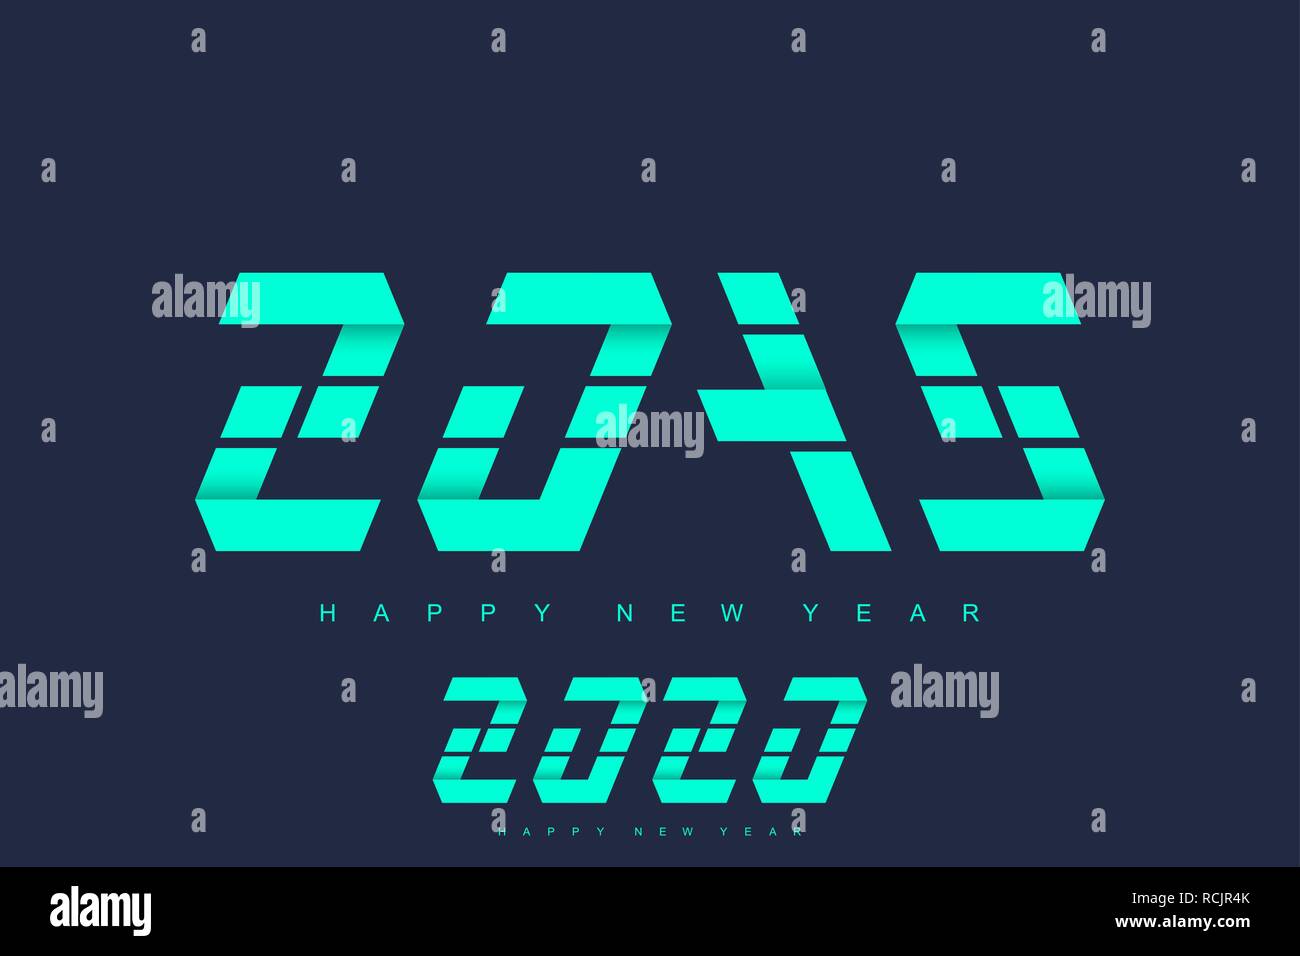 Merry Christmas and Happy New Year 2019 and 2020 greeting card. Modern futuristic template for 2019 and 2020. Business technology concept. Vector illustration. Stock Vector